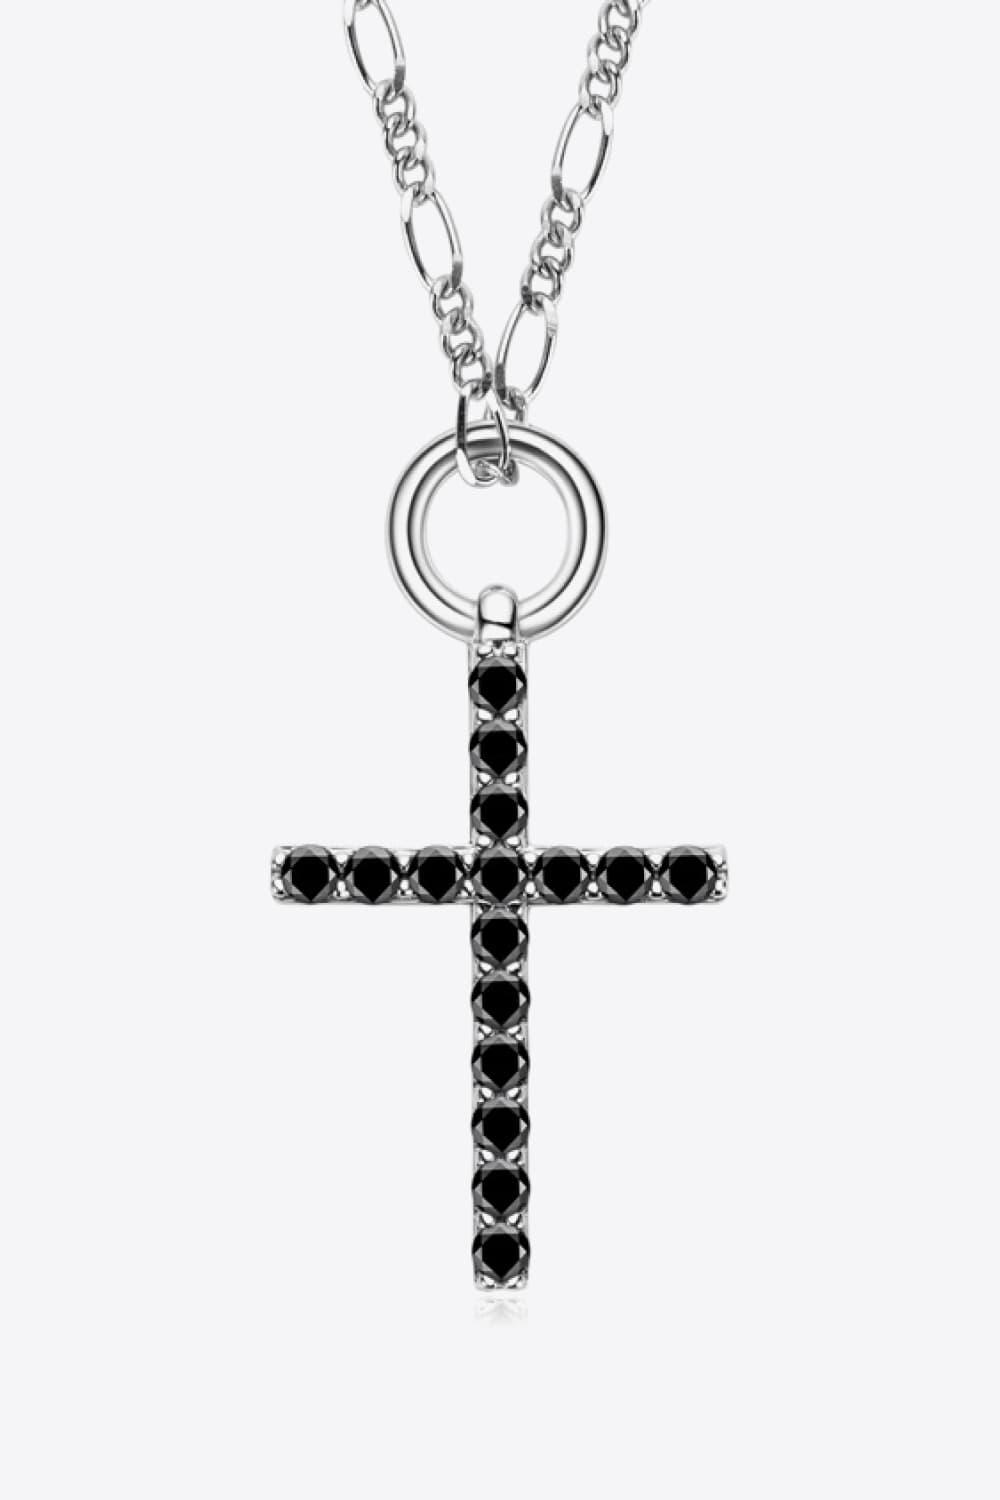 Exquisite Platinum-Plated Unisex Necklace with Lab-Diamond Cross Pendant and Sterling Silver Chain